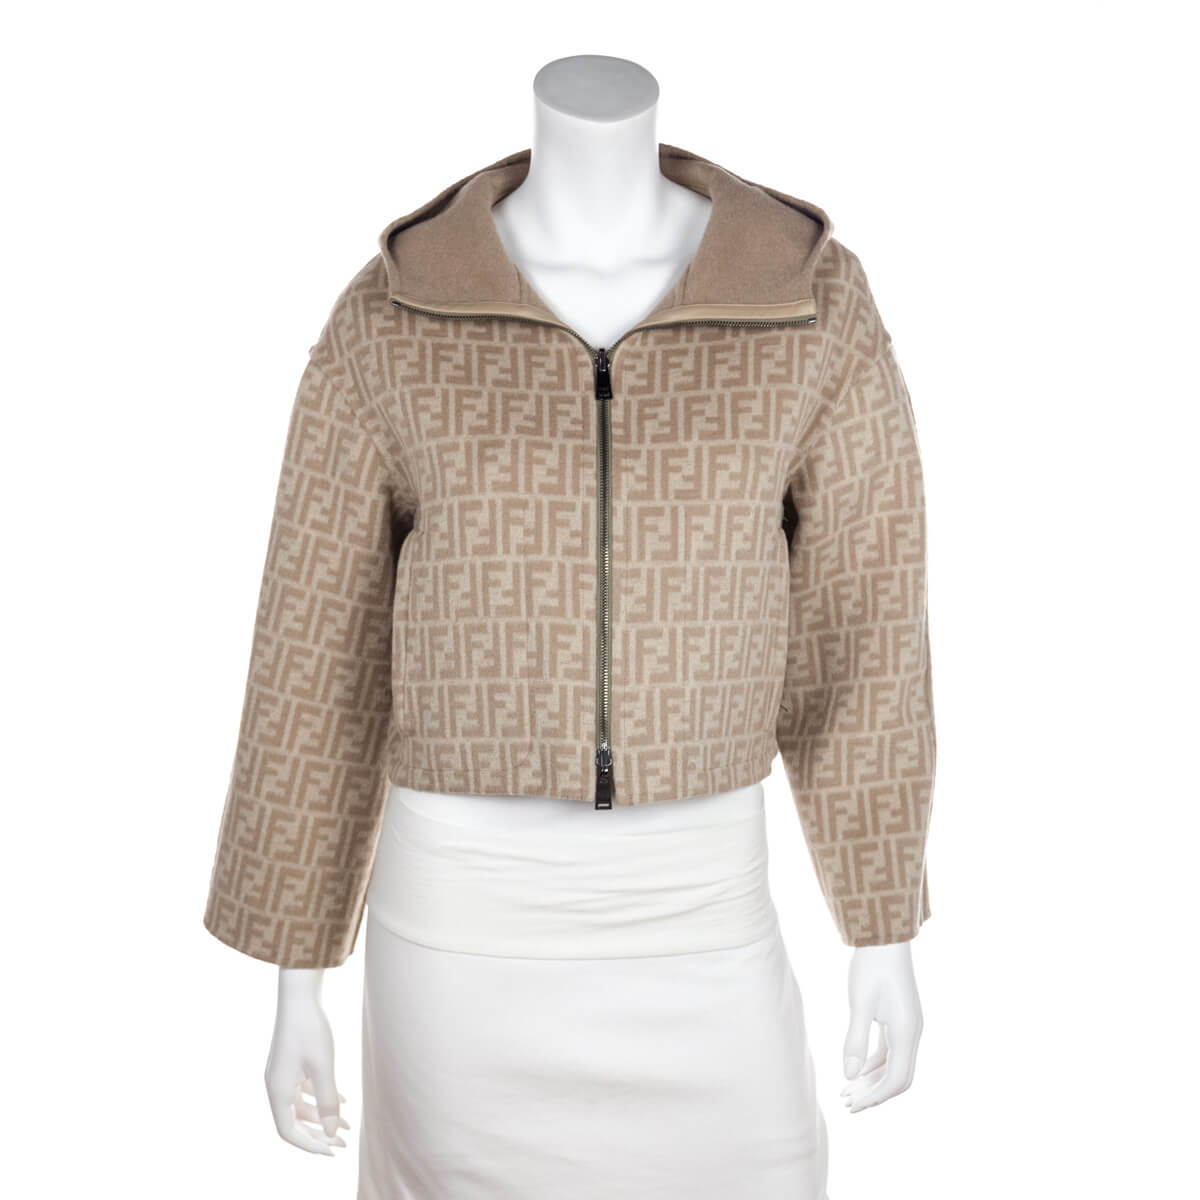 Fendi Beige Wool Reversible Jacket Size XS | IT 36 - Love that Bag etc - Preowned Authentic Designer Handbags & Preloved Fashions